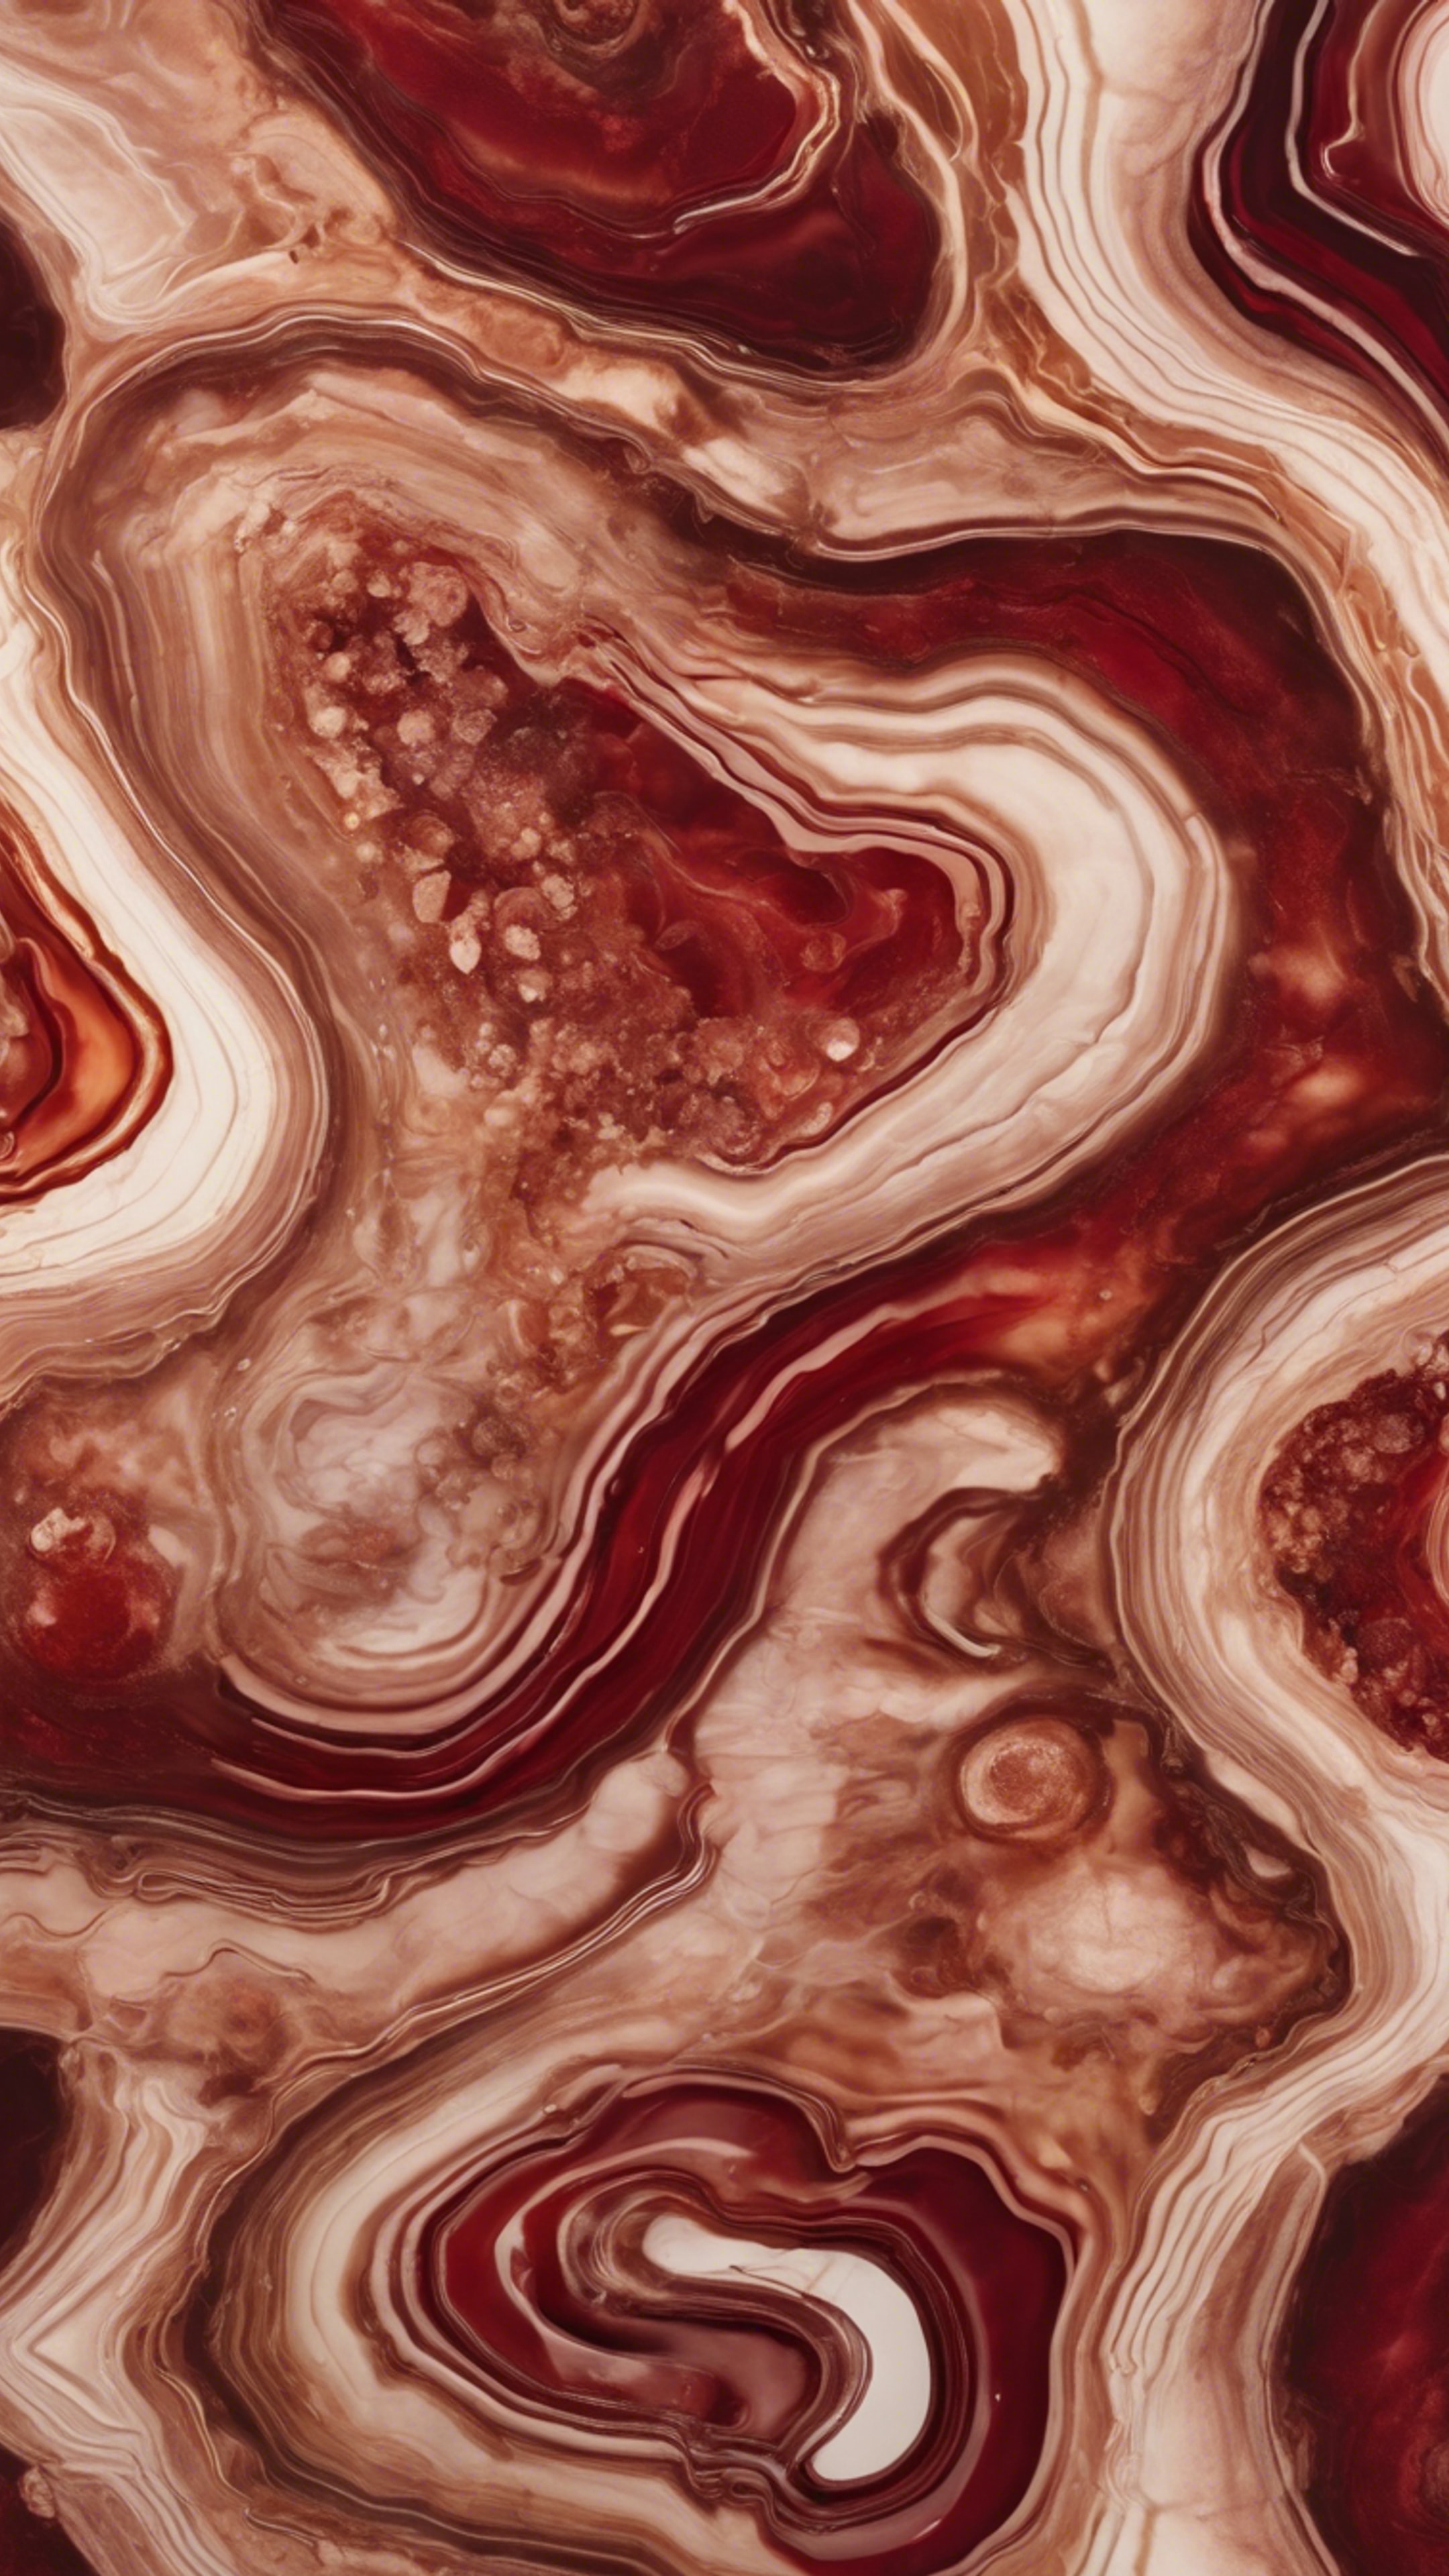 Grungy agate swirls in garnet red and sepia tones, forming a fascinating, abstract pattern. Дэлгэцийн зураг[bb48f1c473e4473bbd4a]